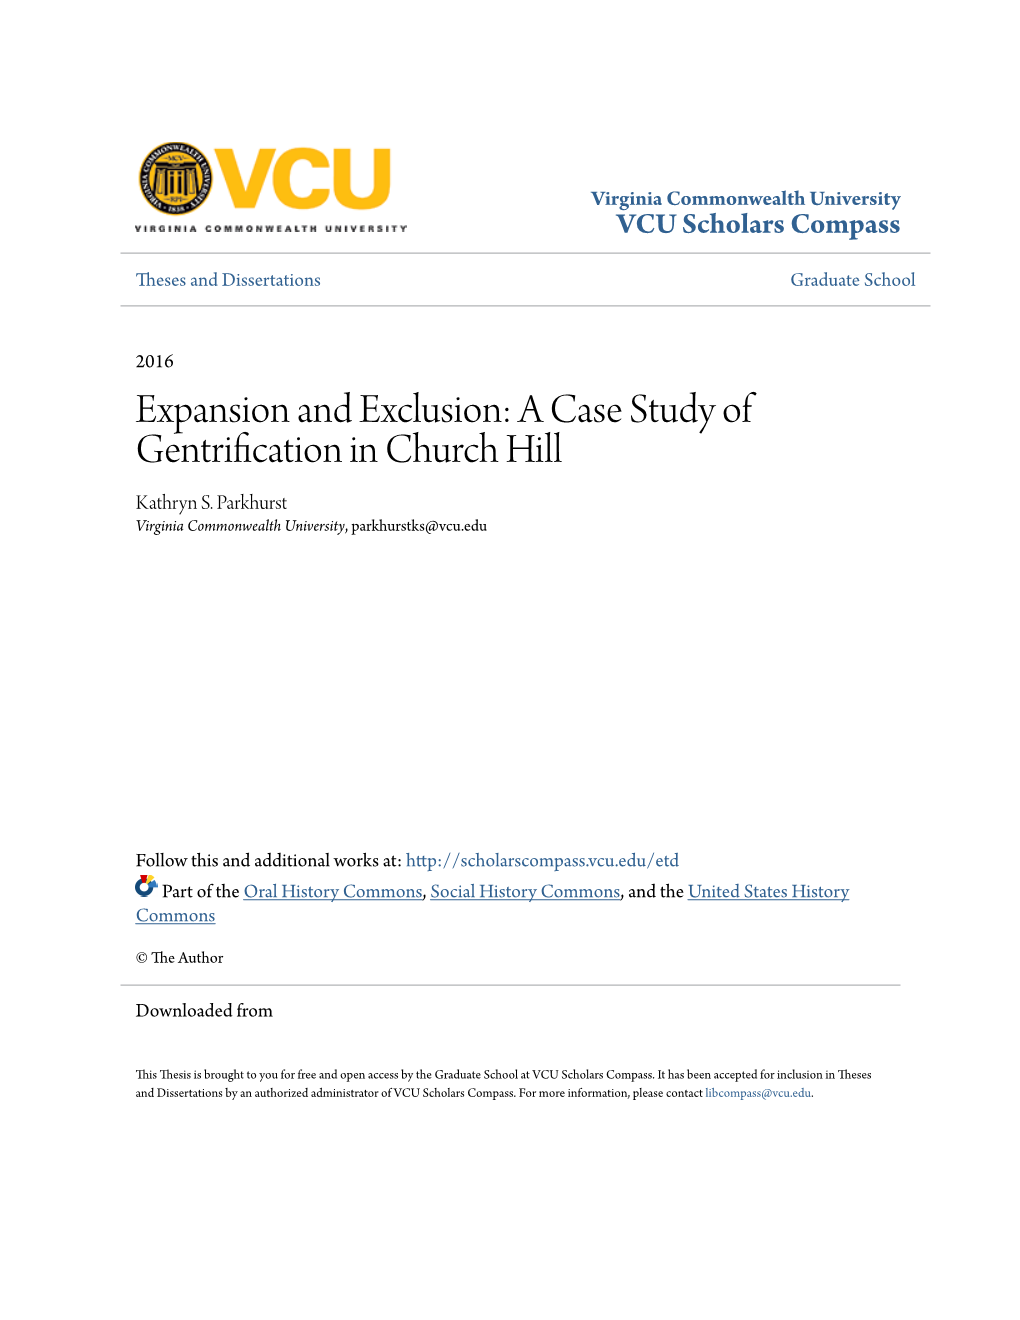 Expansion and Exclusion: a Case Study of Gentrification in Church Hill Kathryn S